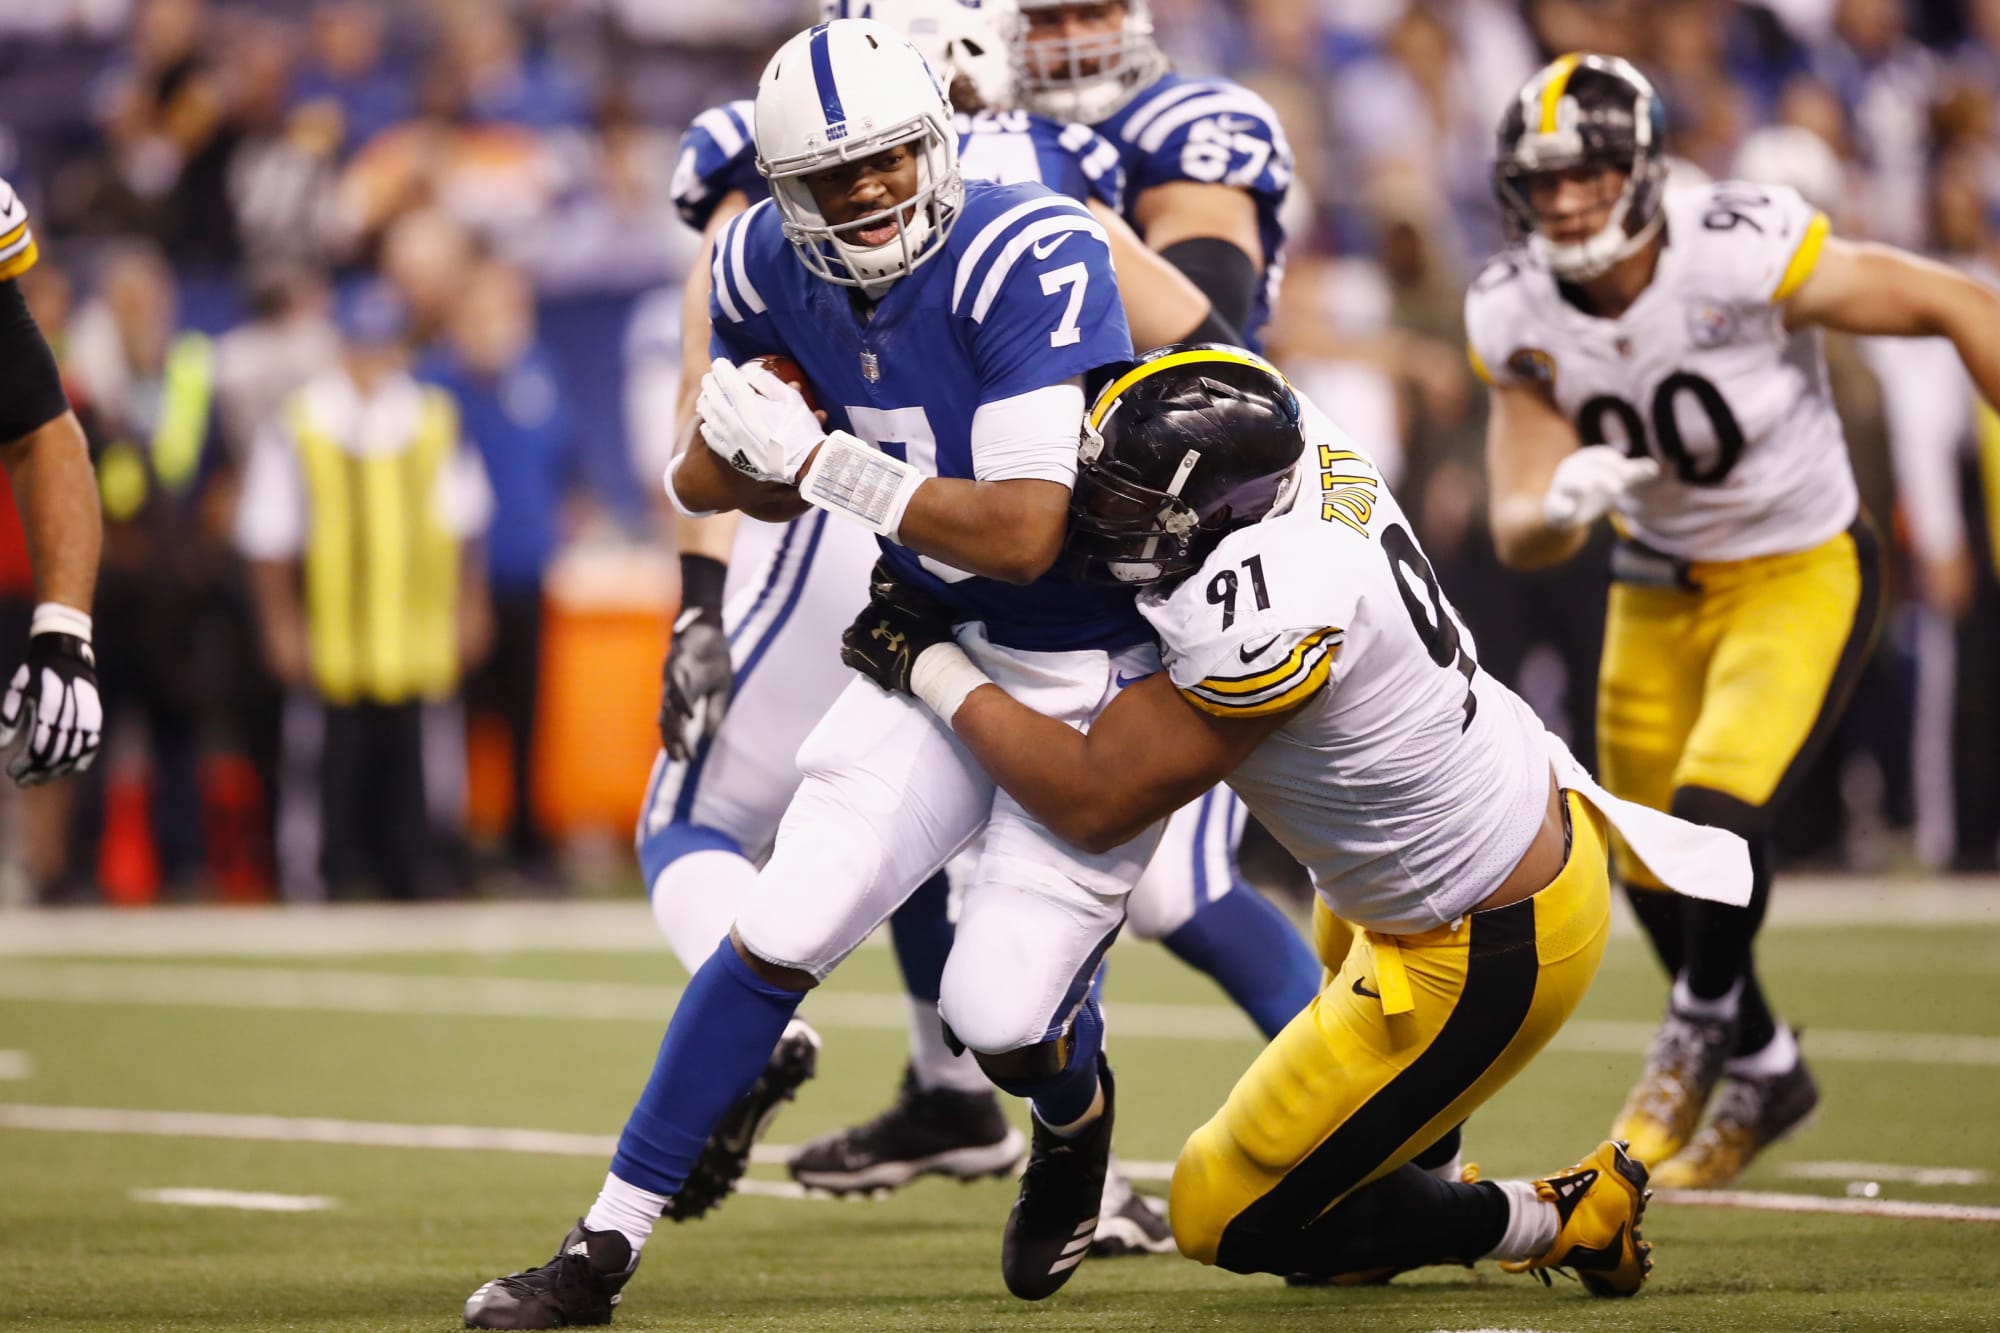 Steelers vs. Colts 3 Key matchups to watch for in week 9